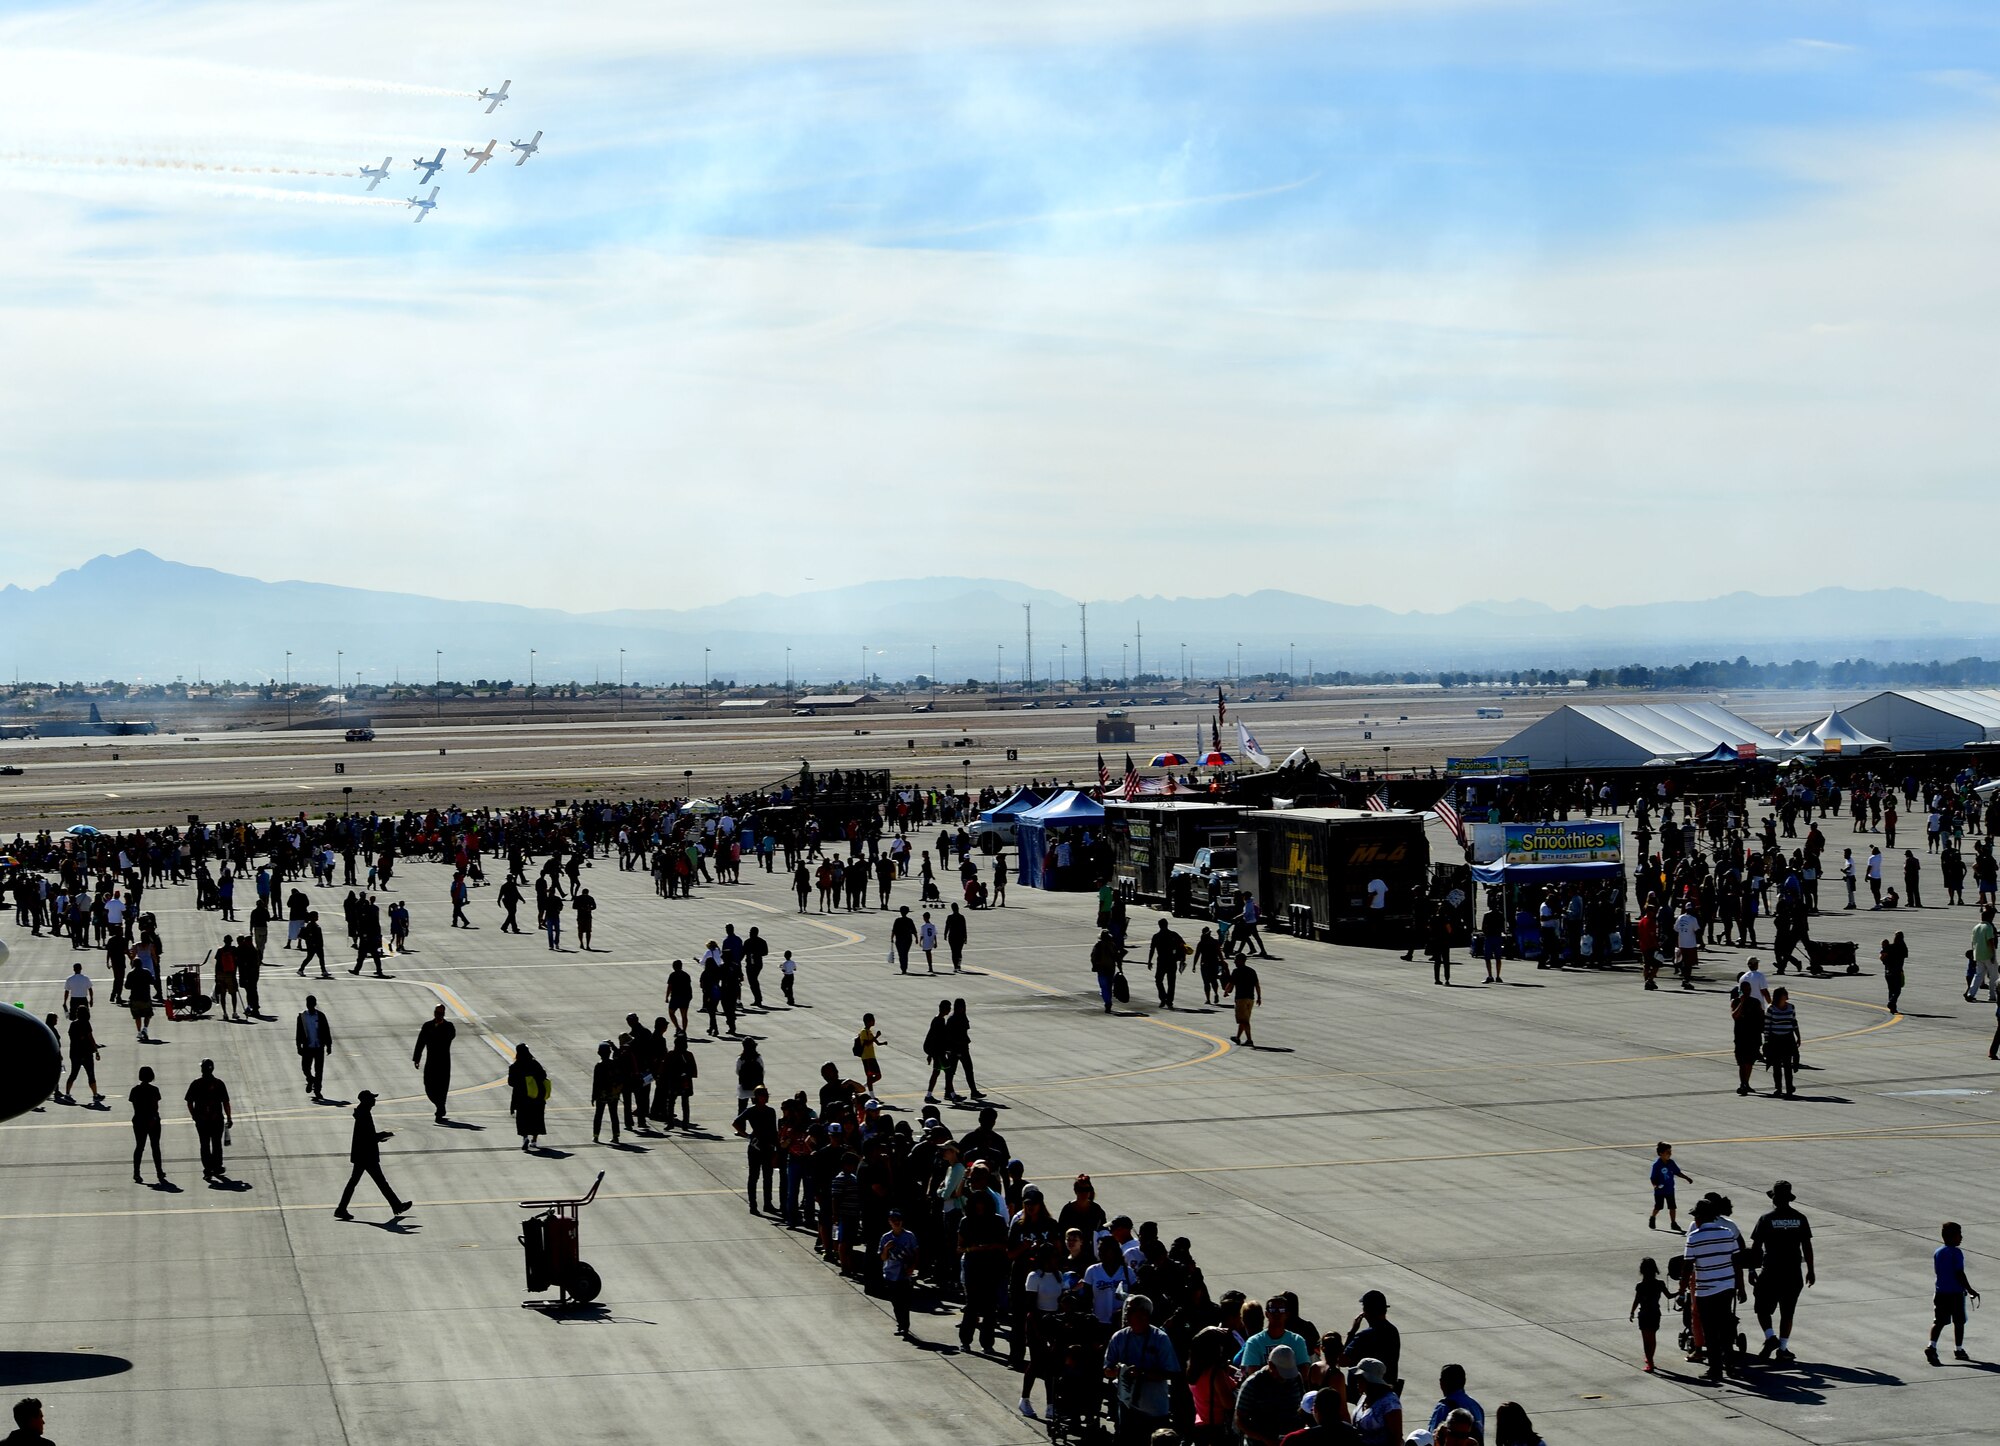 Spectators enjoy an aerial demonstration during Aviation Nation Nov. 12, 2016, at Nellis Air Force Base, Nevada. The base hosted more than 300,000 people during the air show. (U.S. Air Force photo by Senior Airman Christian Clausen/Released)